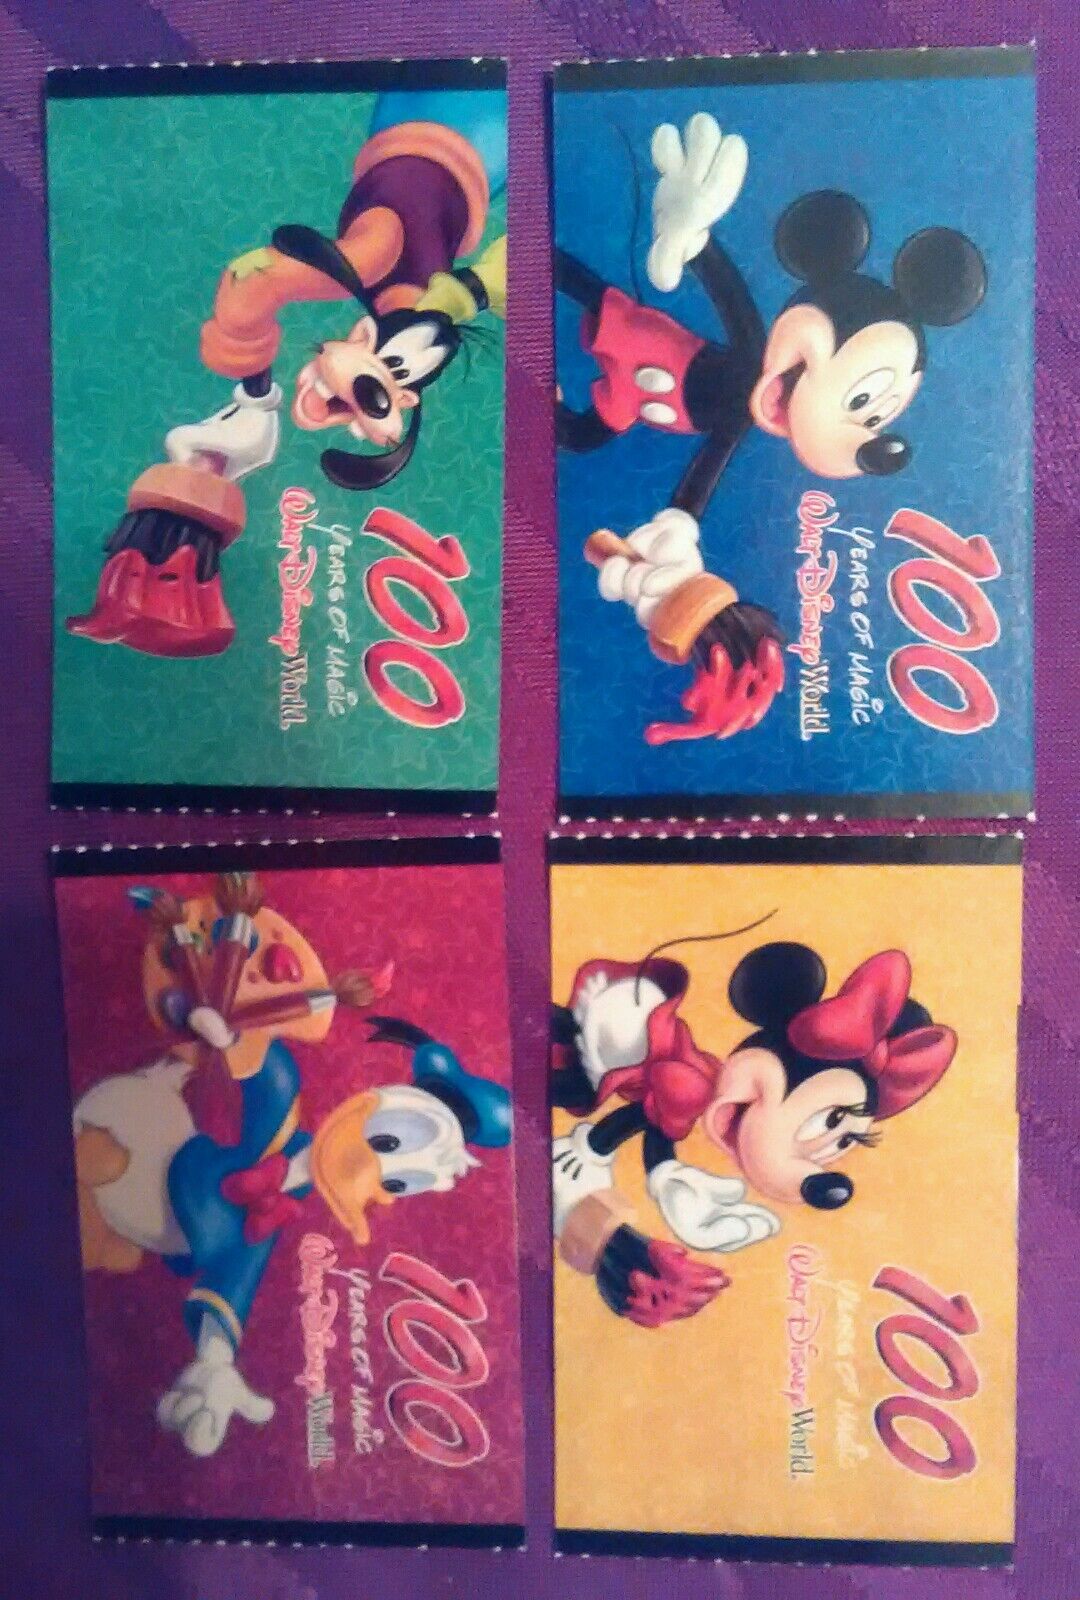   DISNEY  VINTAGE TICKETS  100 YEARS  4  MICKEY MOUSE park collector tickets